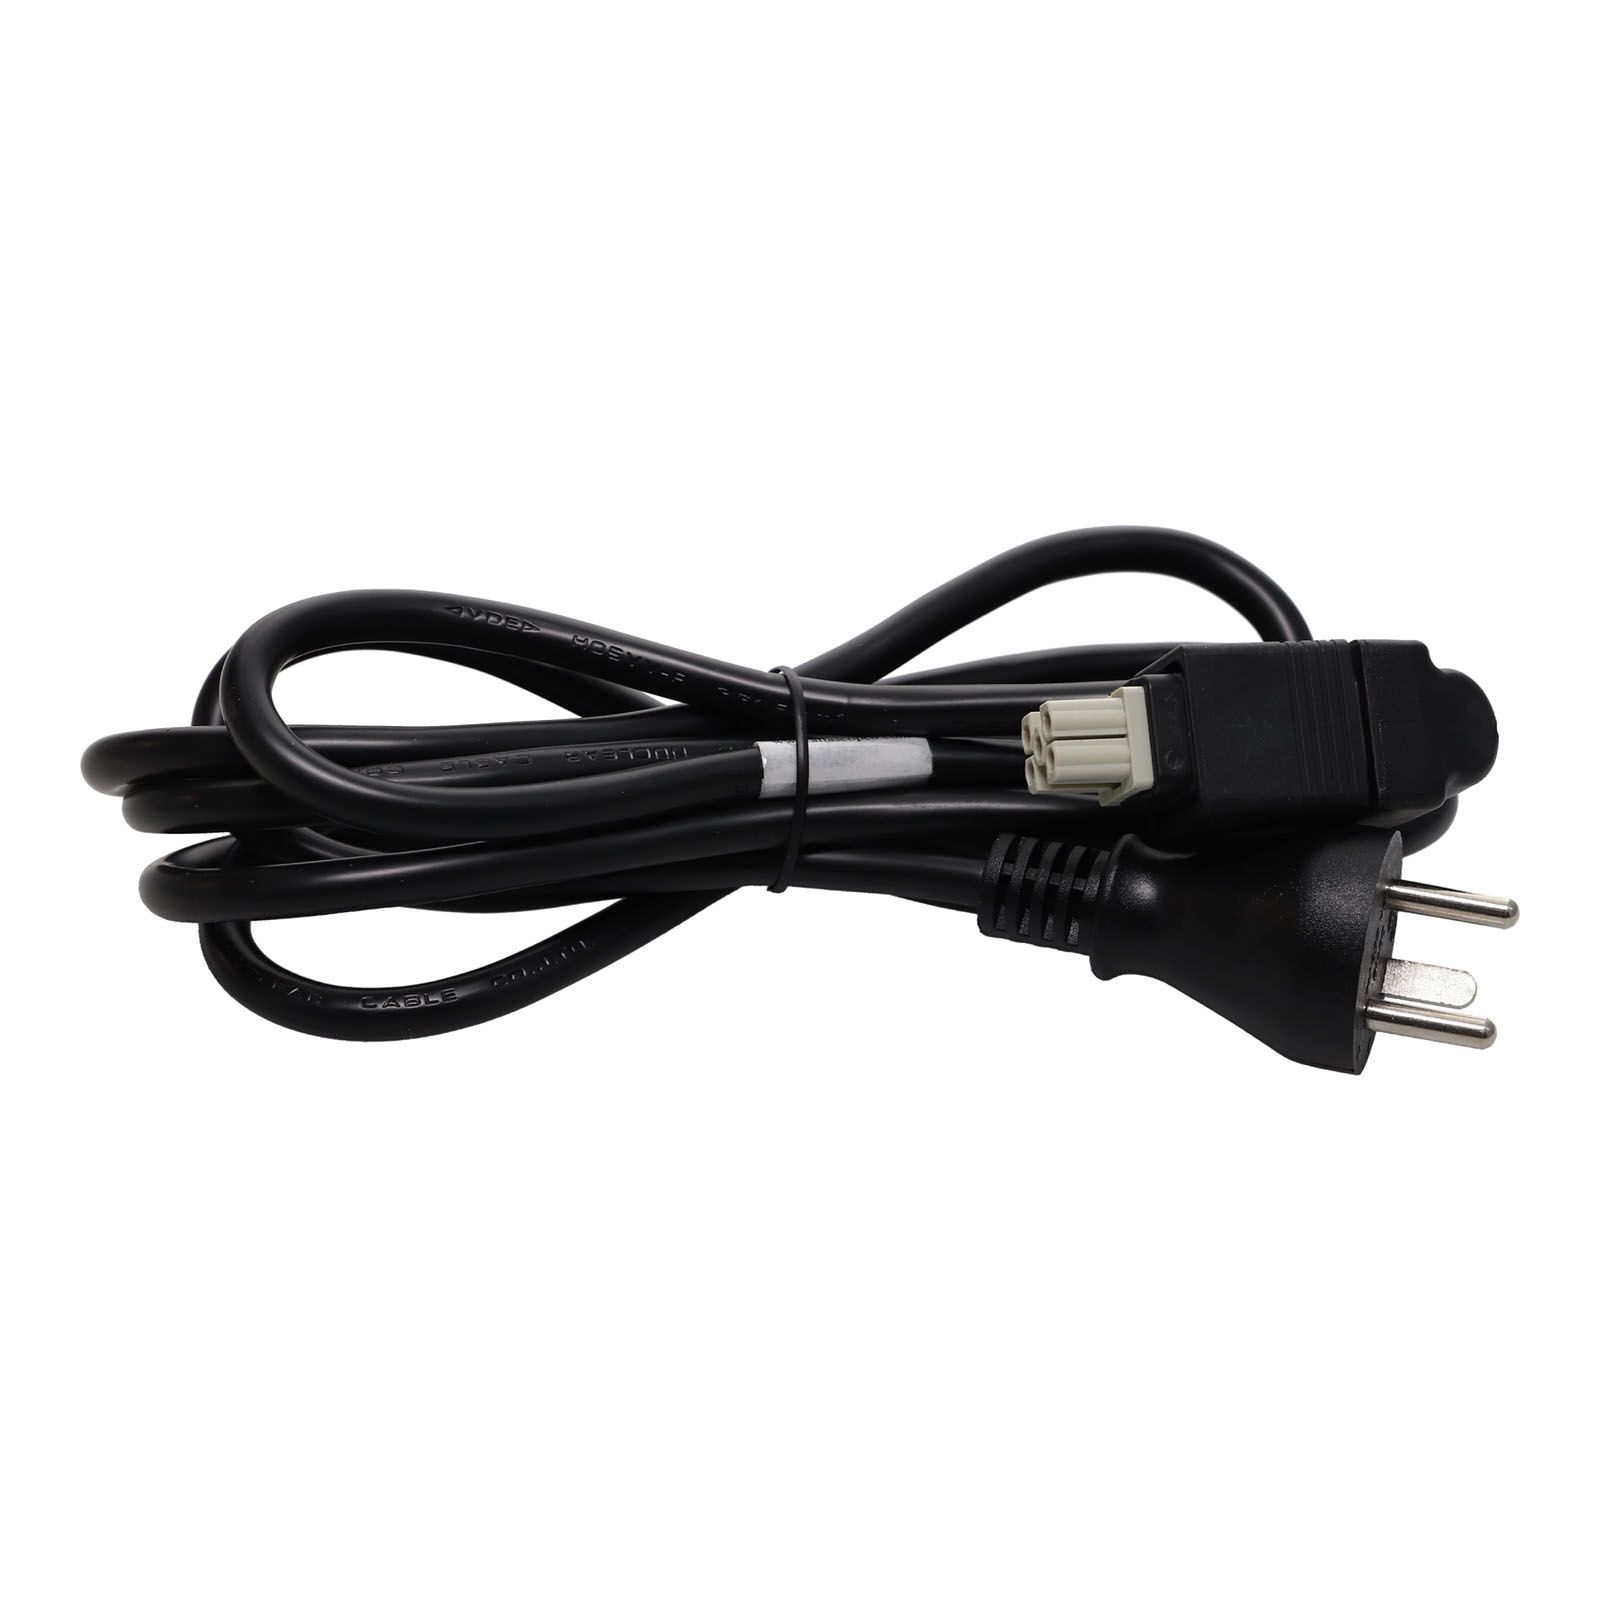 POWER CORD DK - Type K product photo